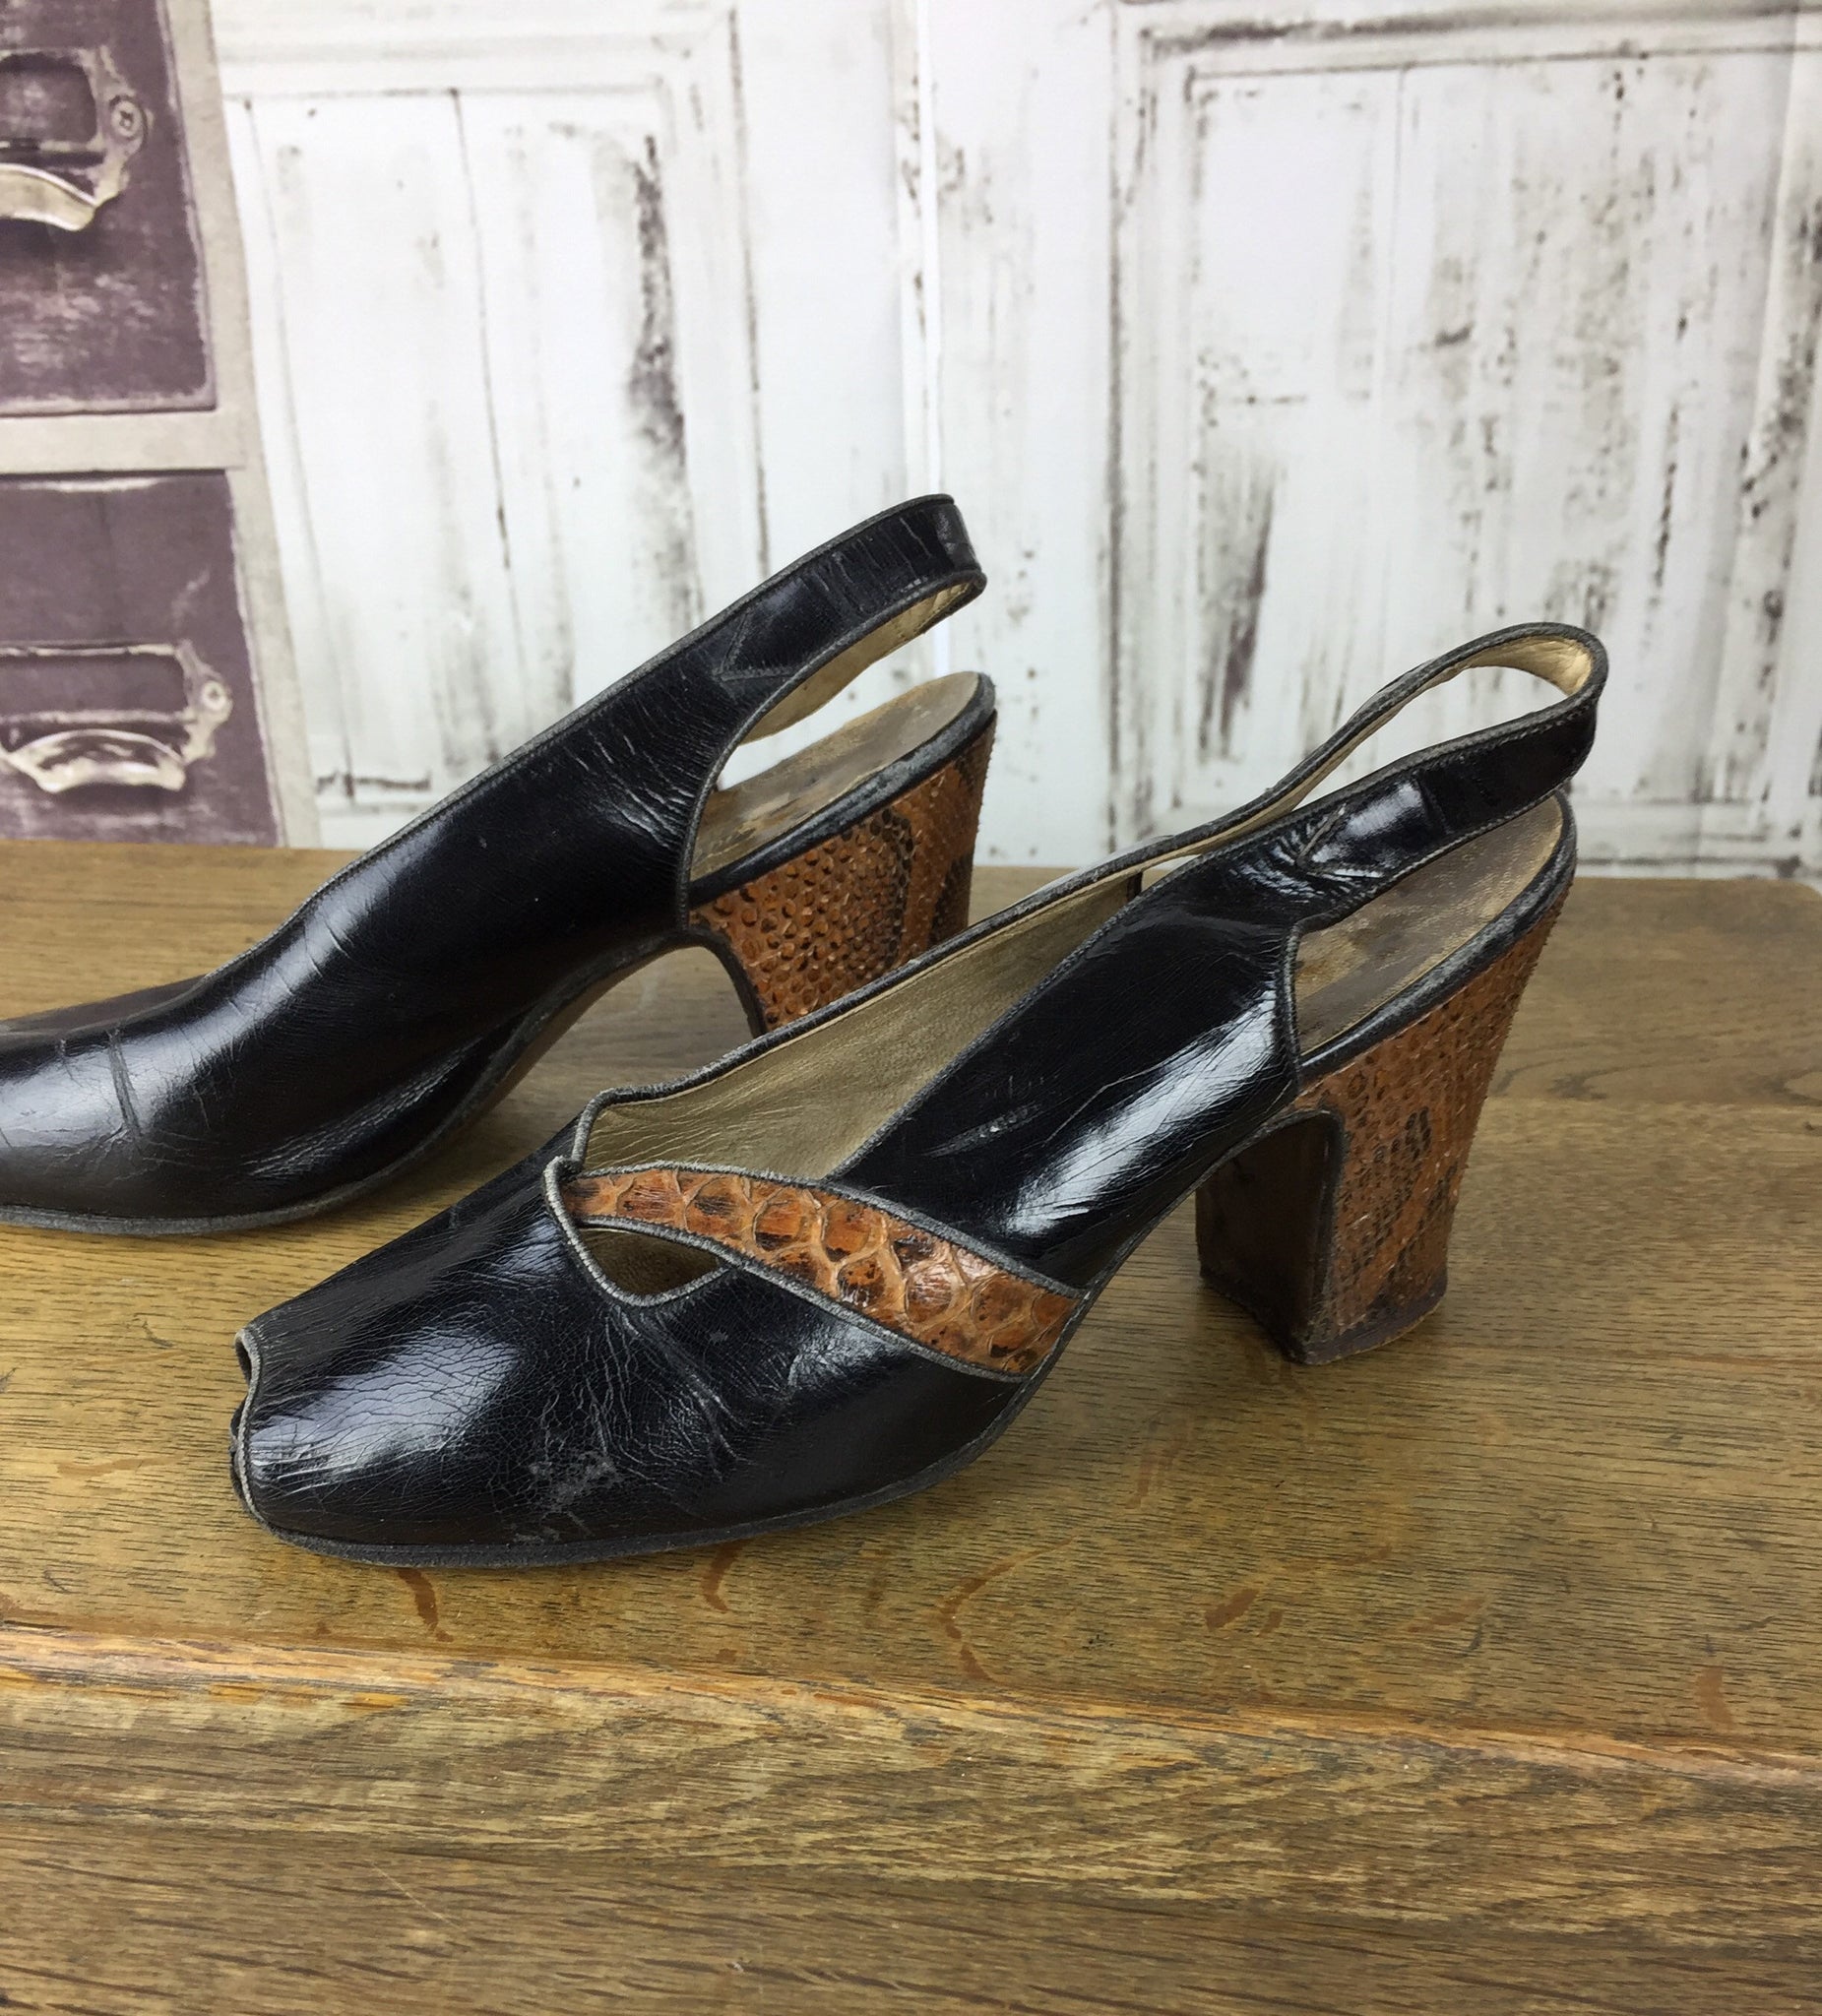 Original 1940s Vintage Black Patent Leather And Brown Reptile High Heel Shoes